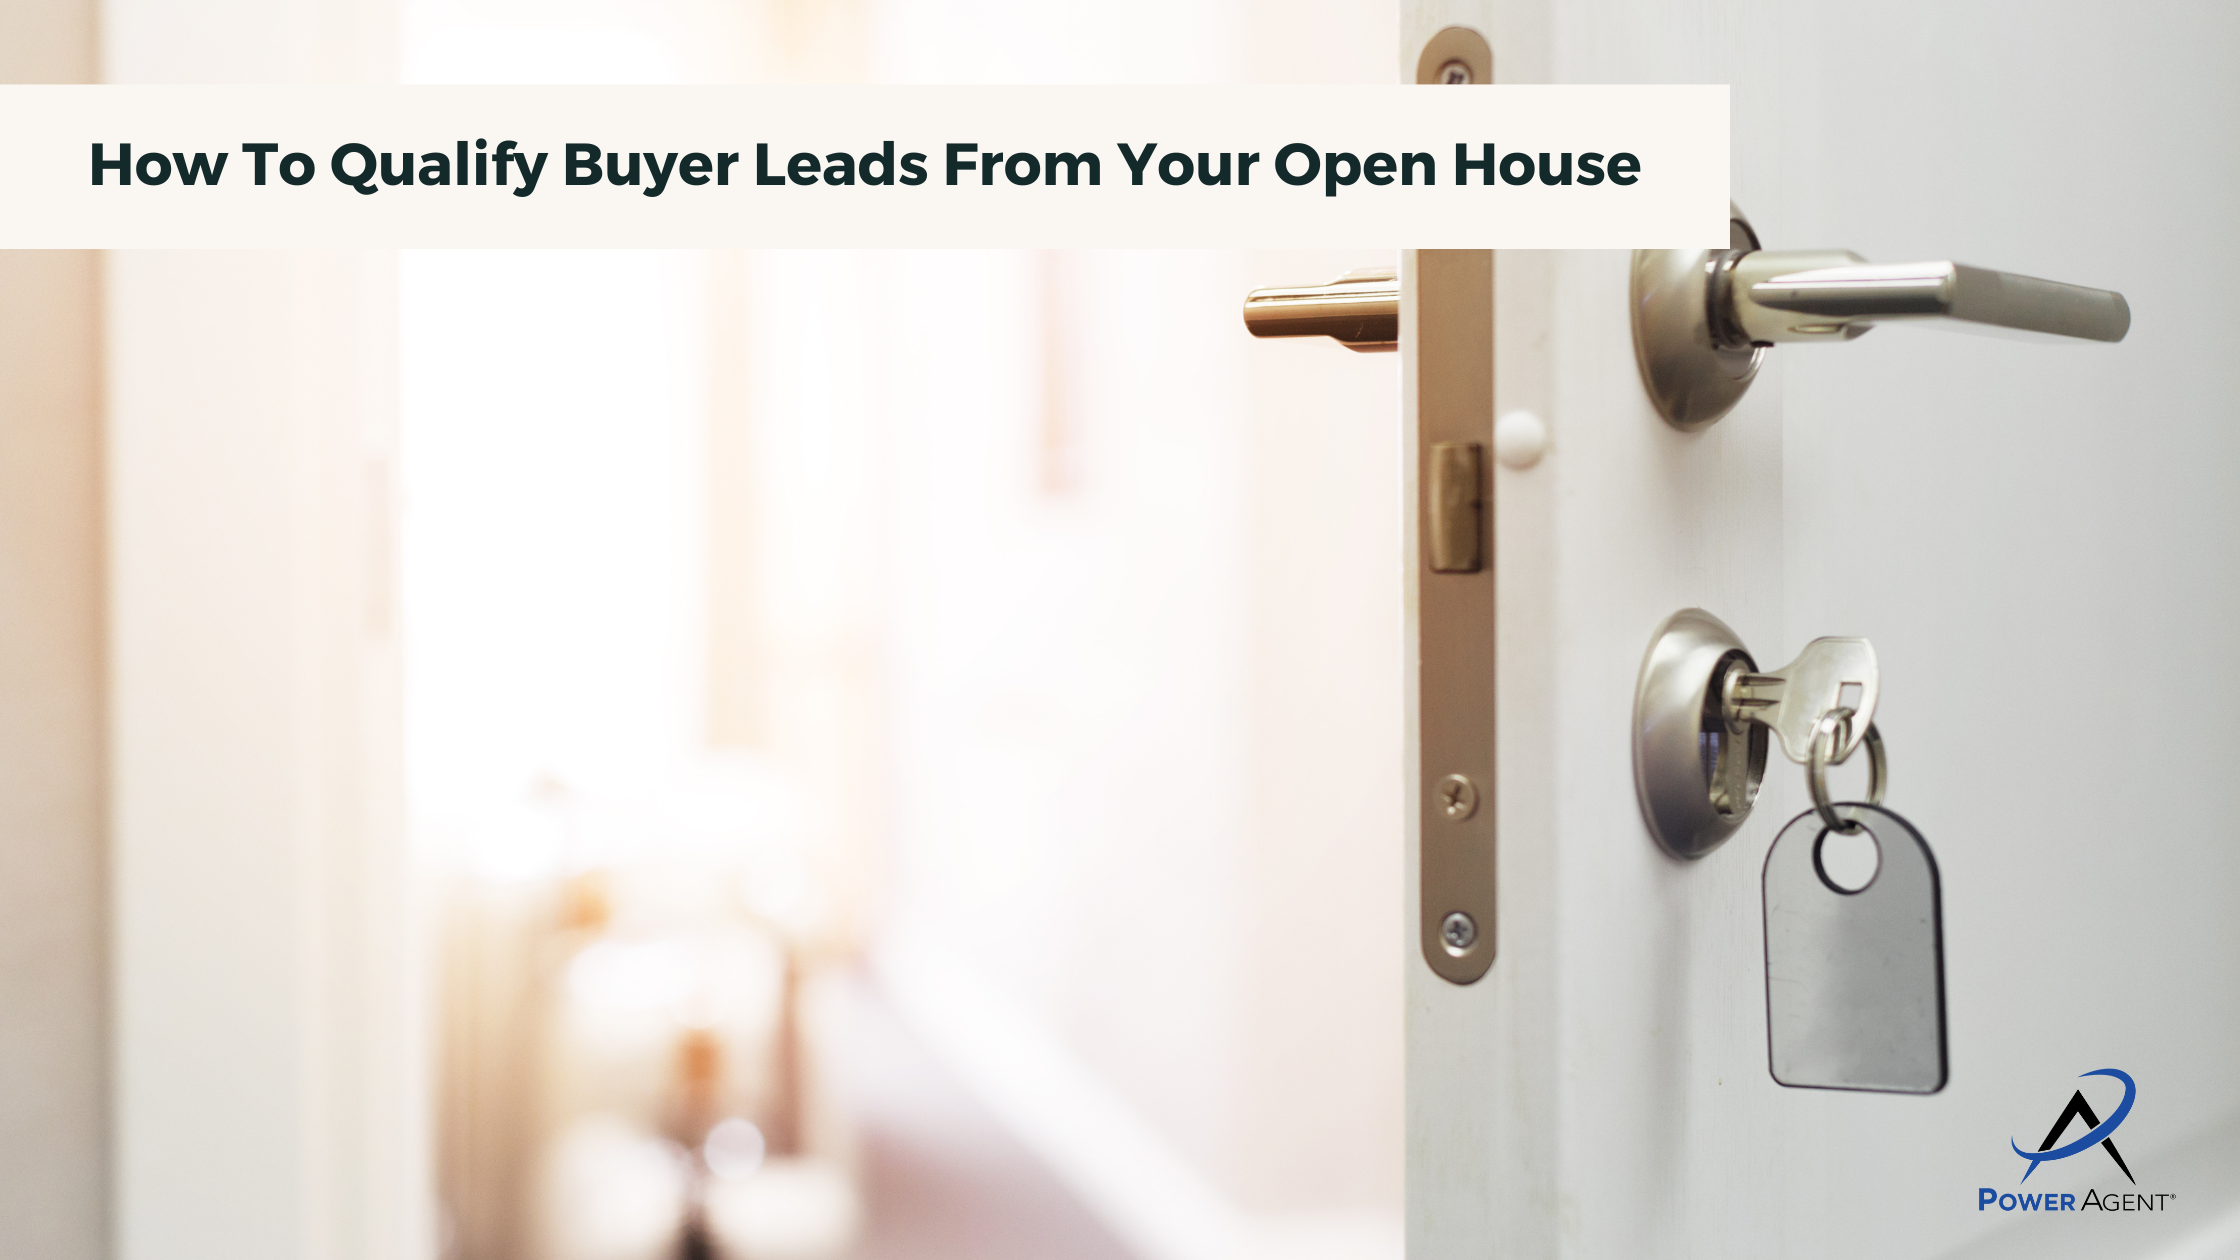 How To Qualify Buyer Leads From Your Open House